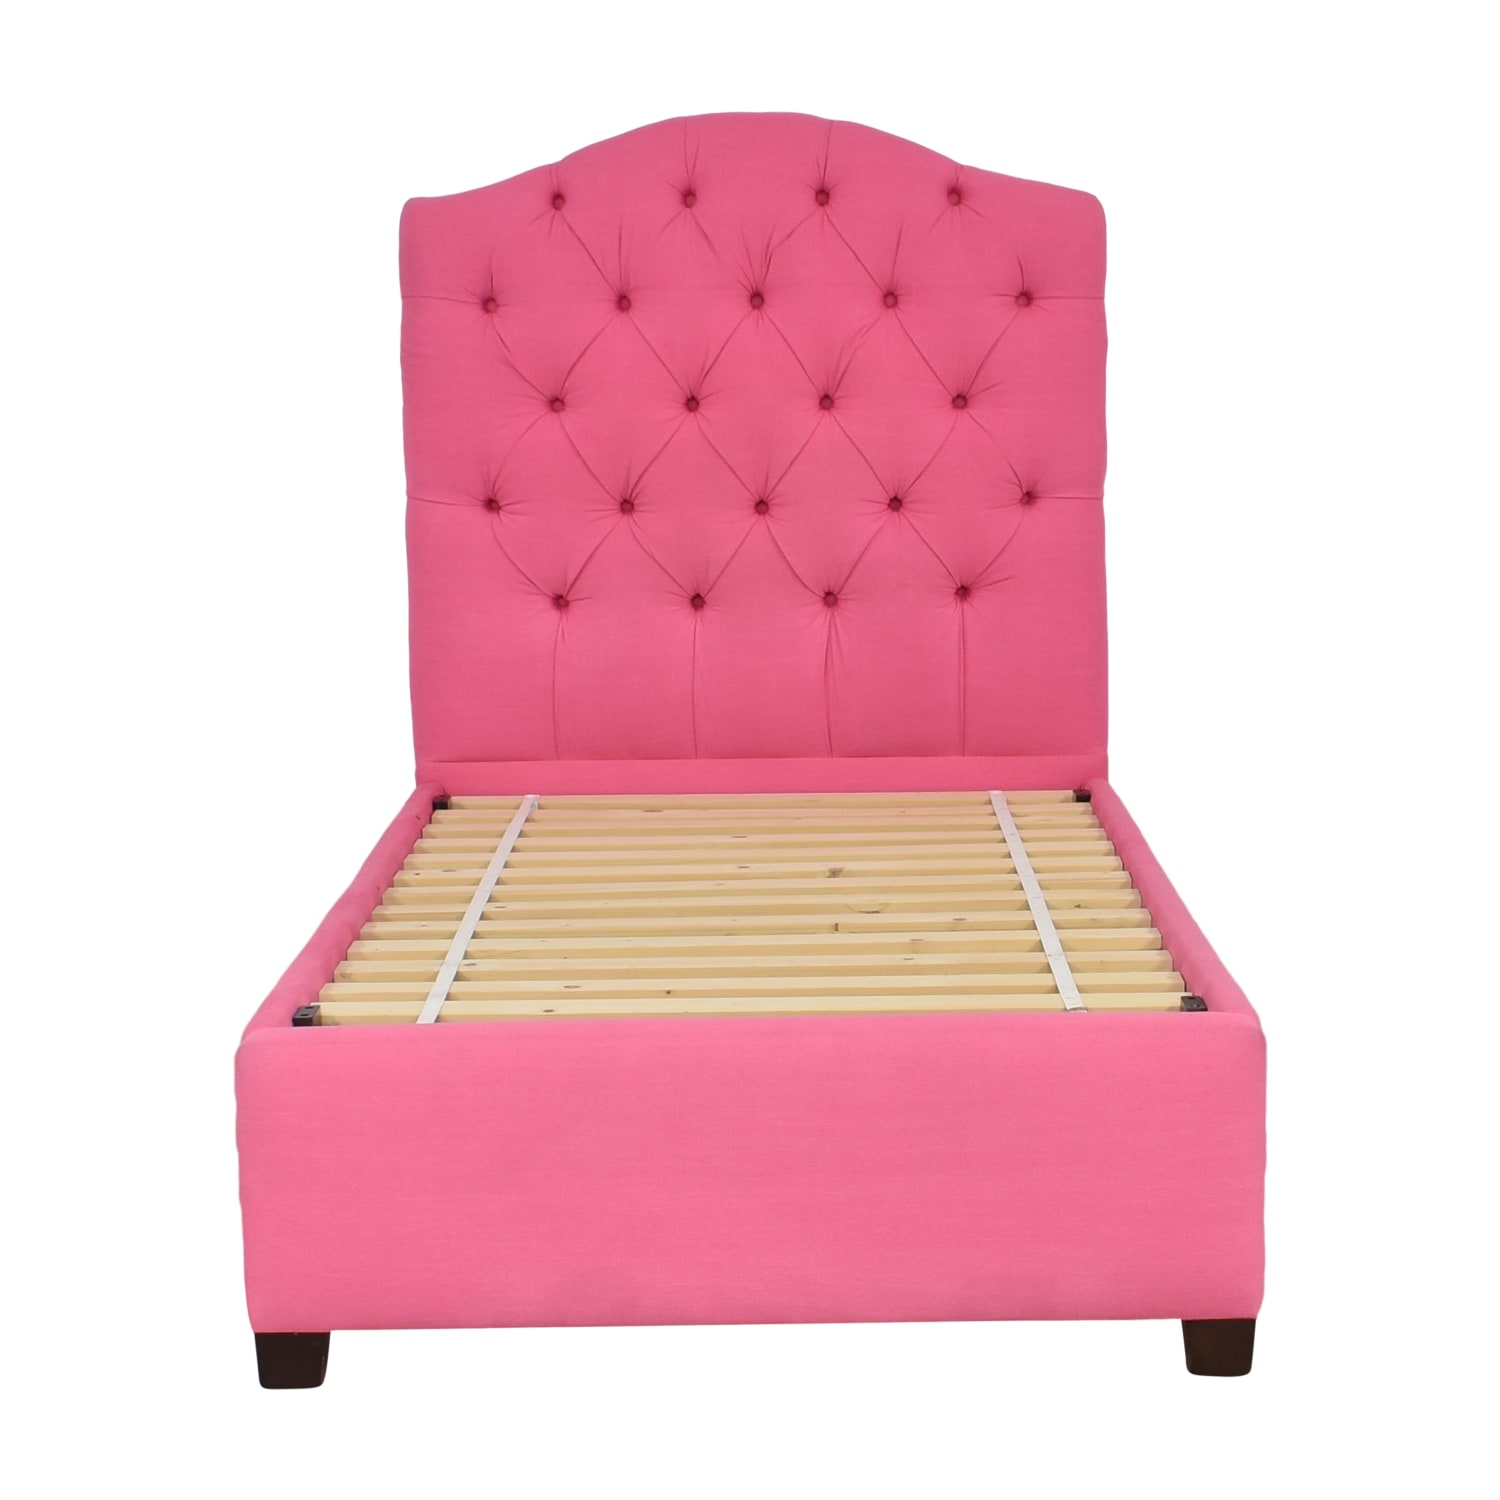 Pink Classic Etch A Sketch - Bed Bath & Beyond - 7870500